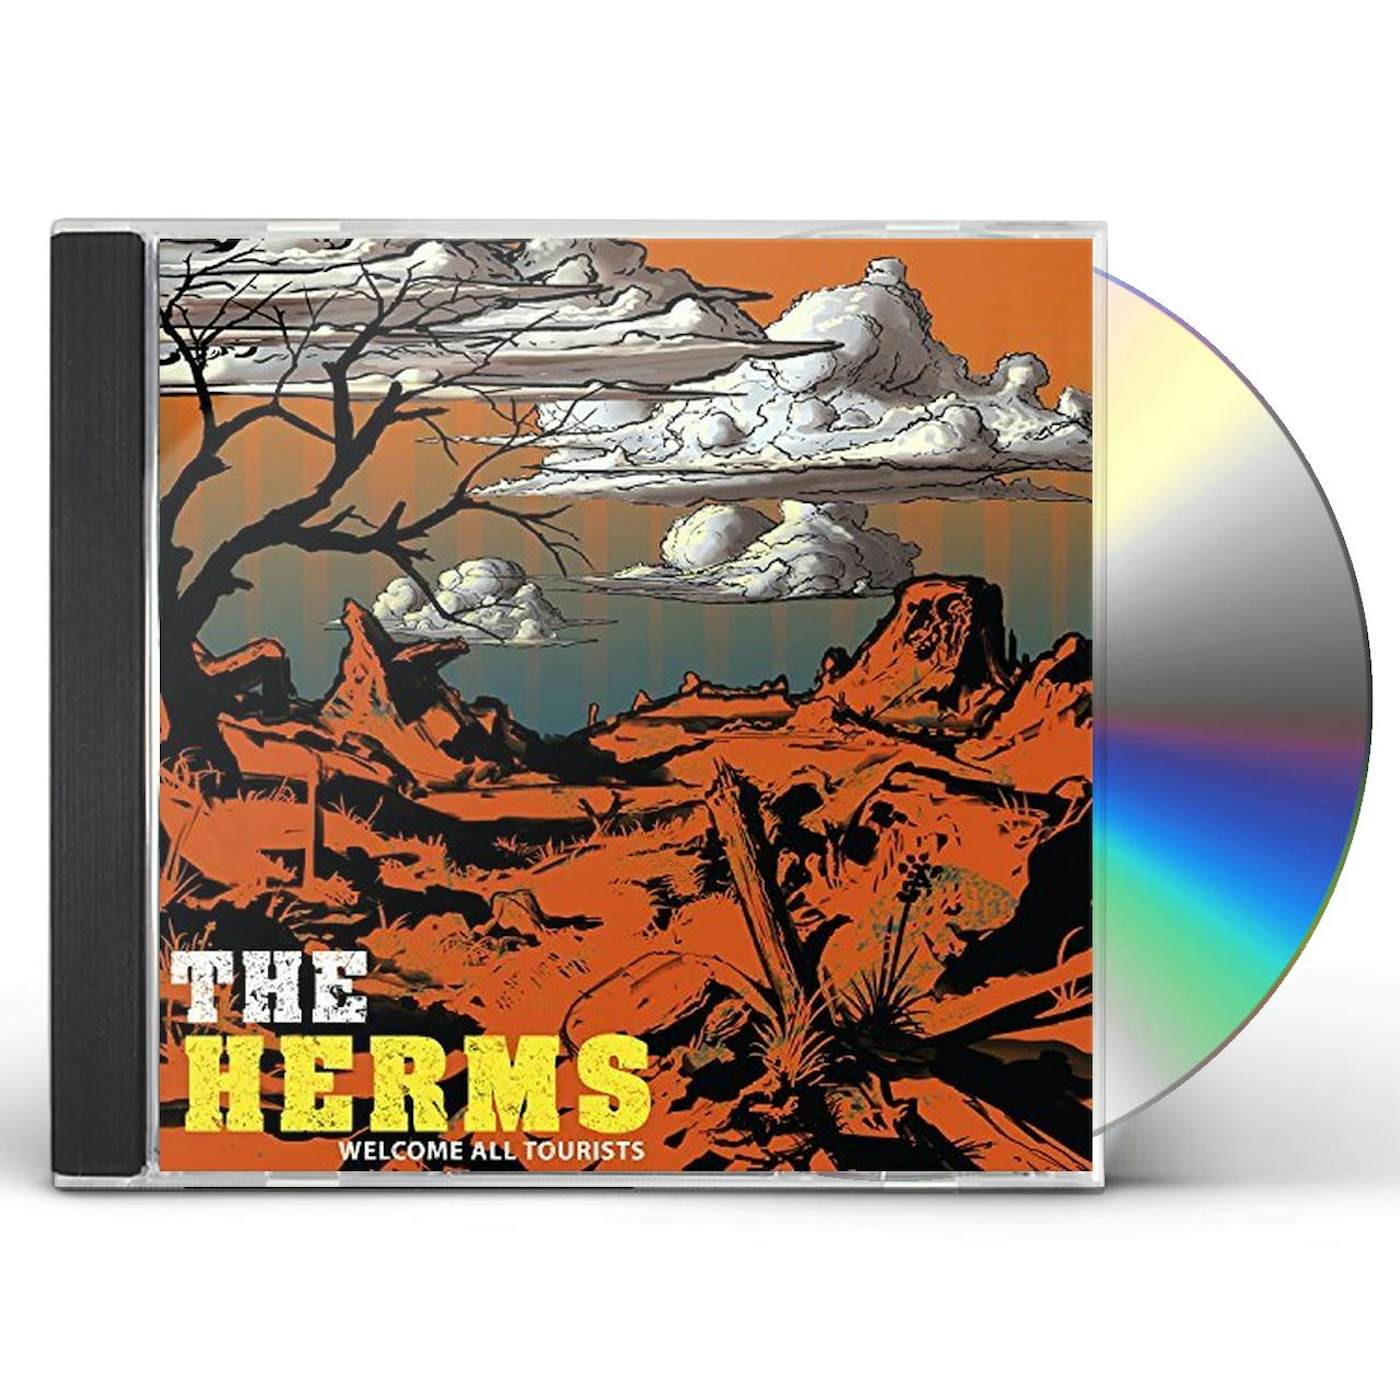 HERMS WELCOME ALL TOURISTS CD